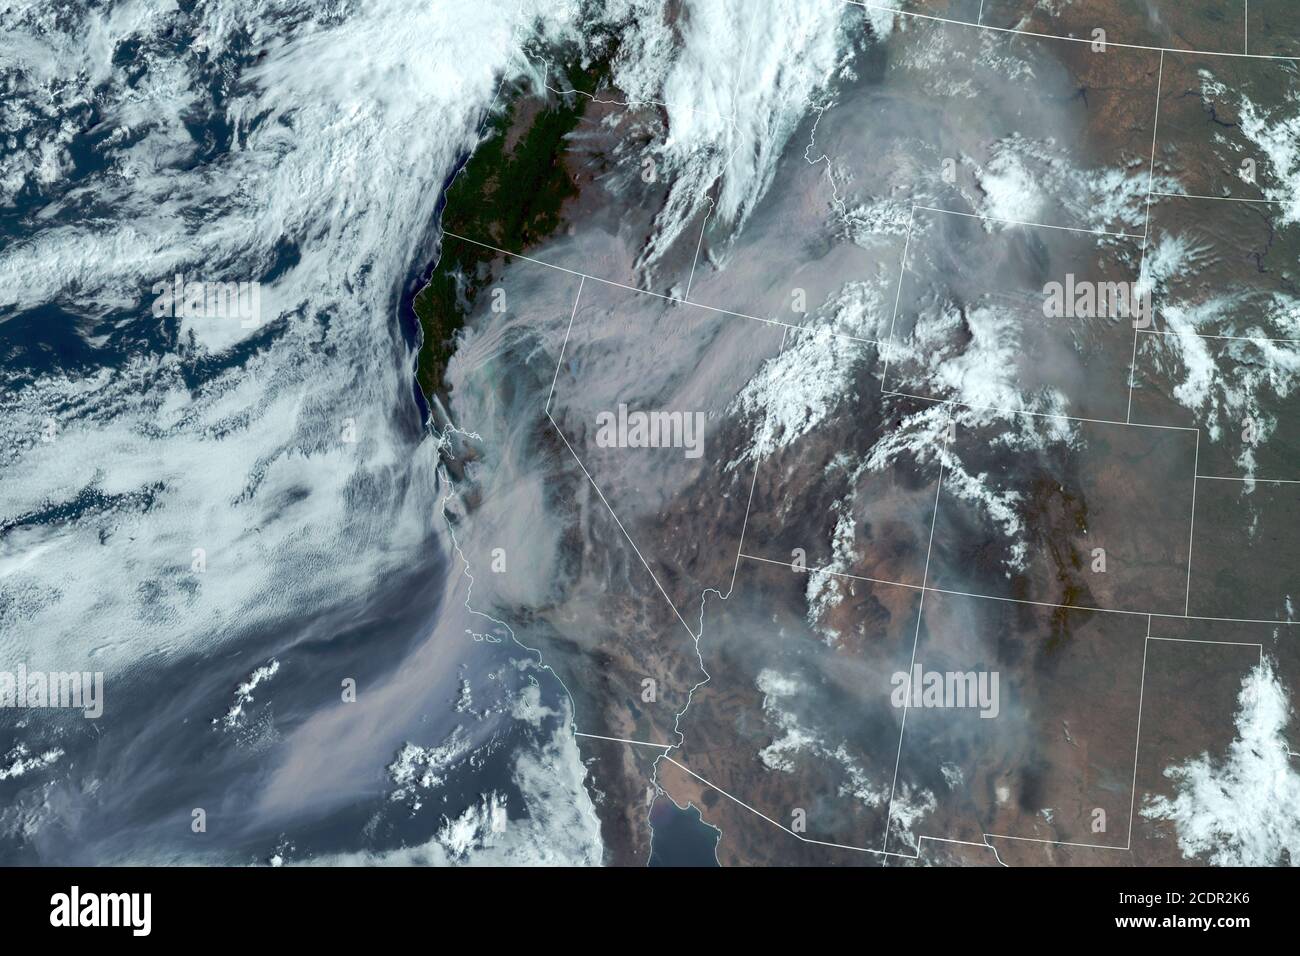 CALIFORNIA, USA - 20 August 2020 - After more than 10,000 lightning strikes in 72 hours, hundreds of wildfires erupted across California, particularly Stock Photo